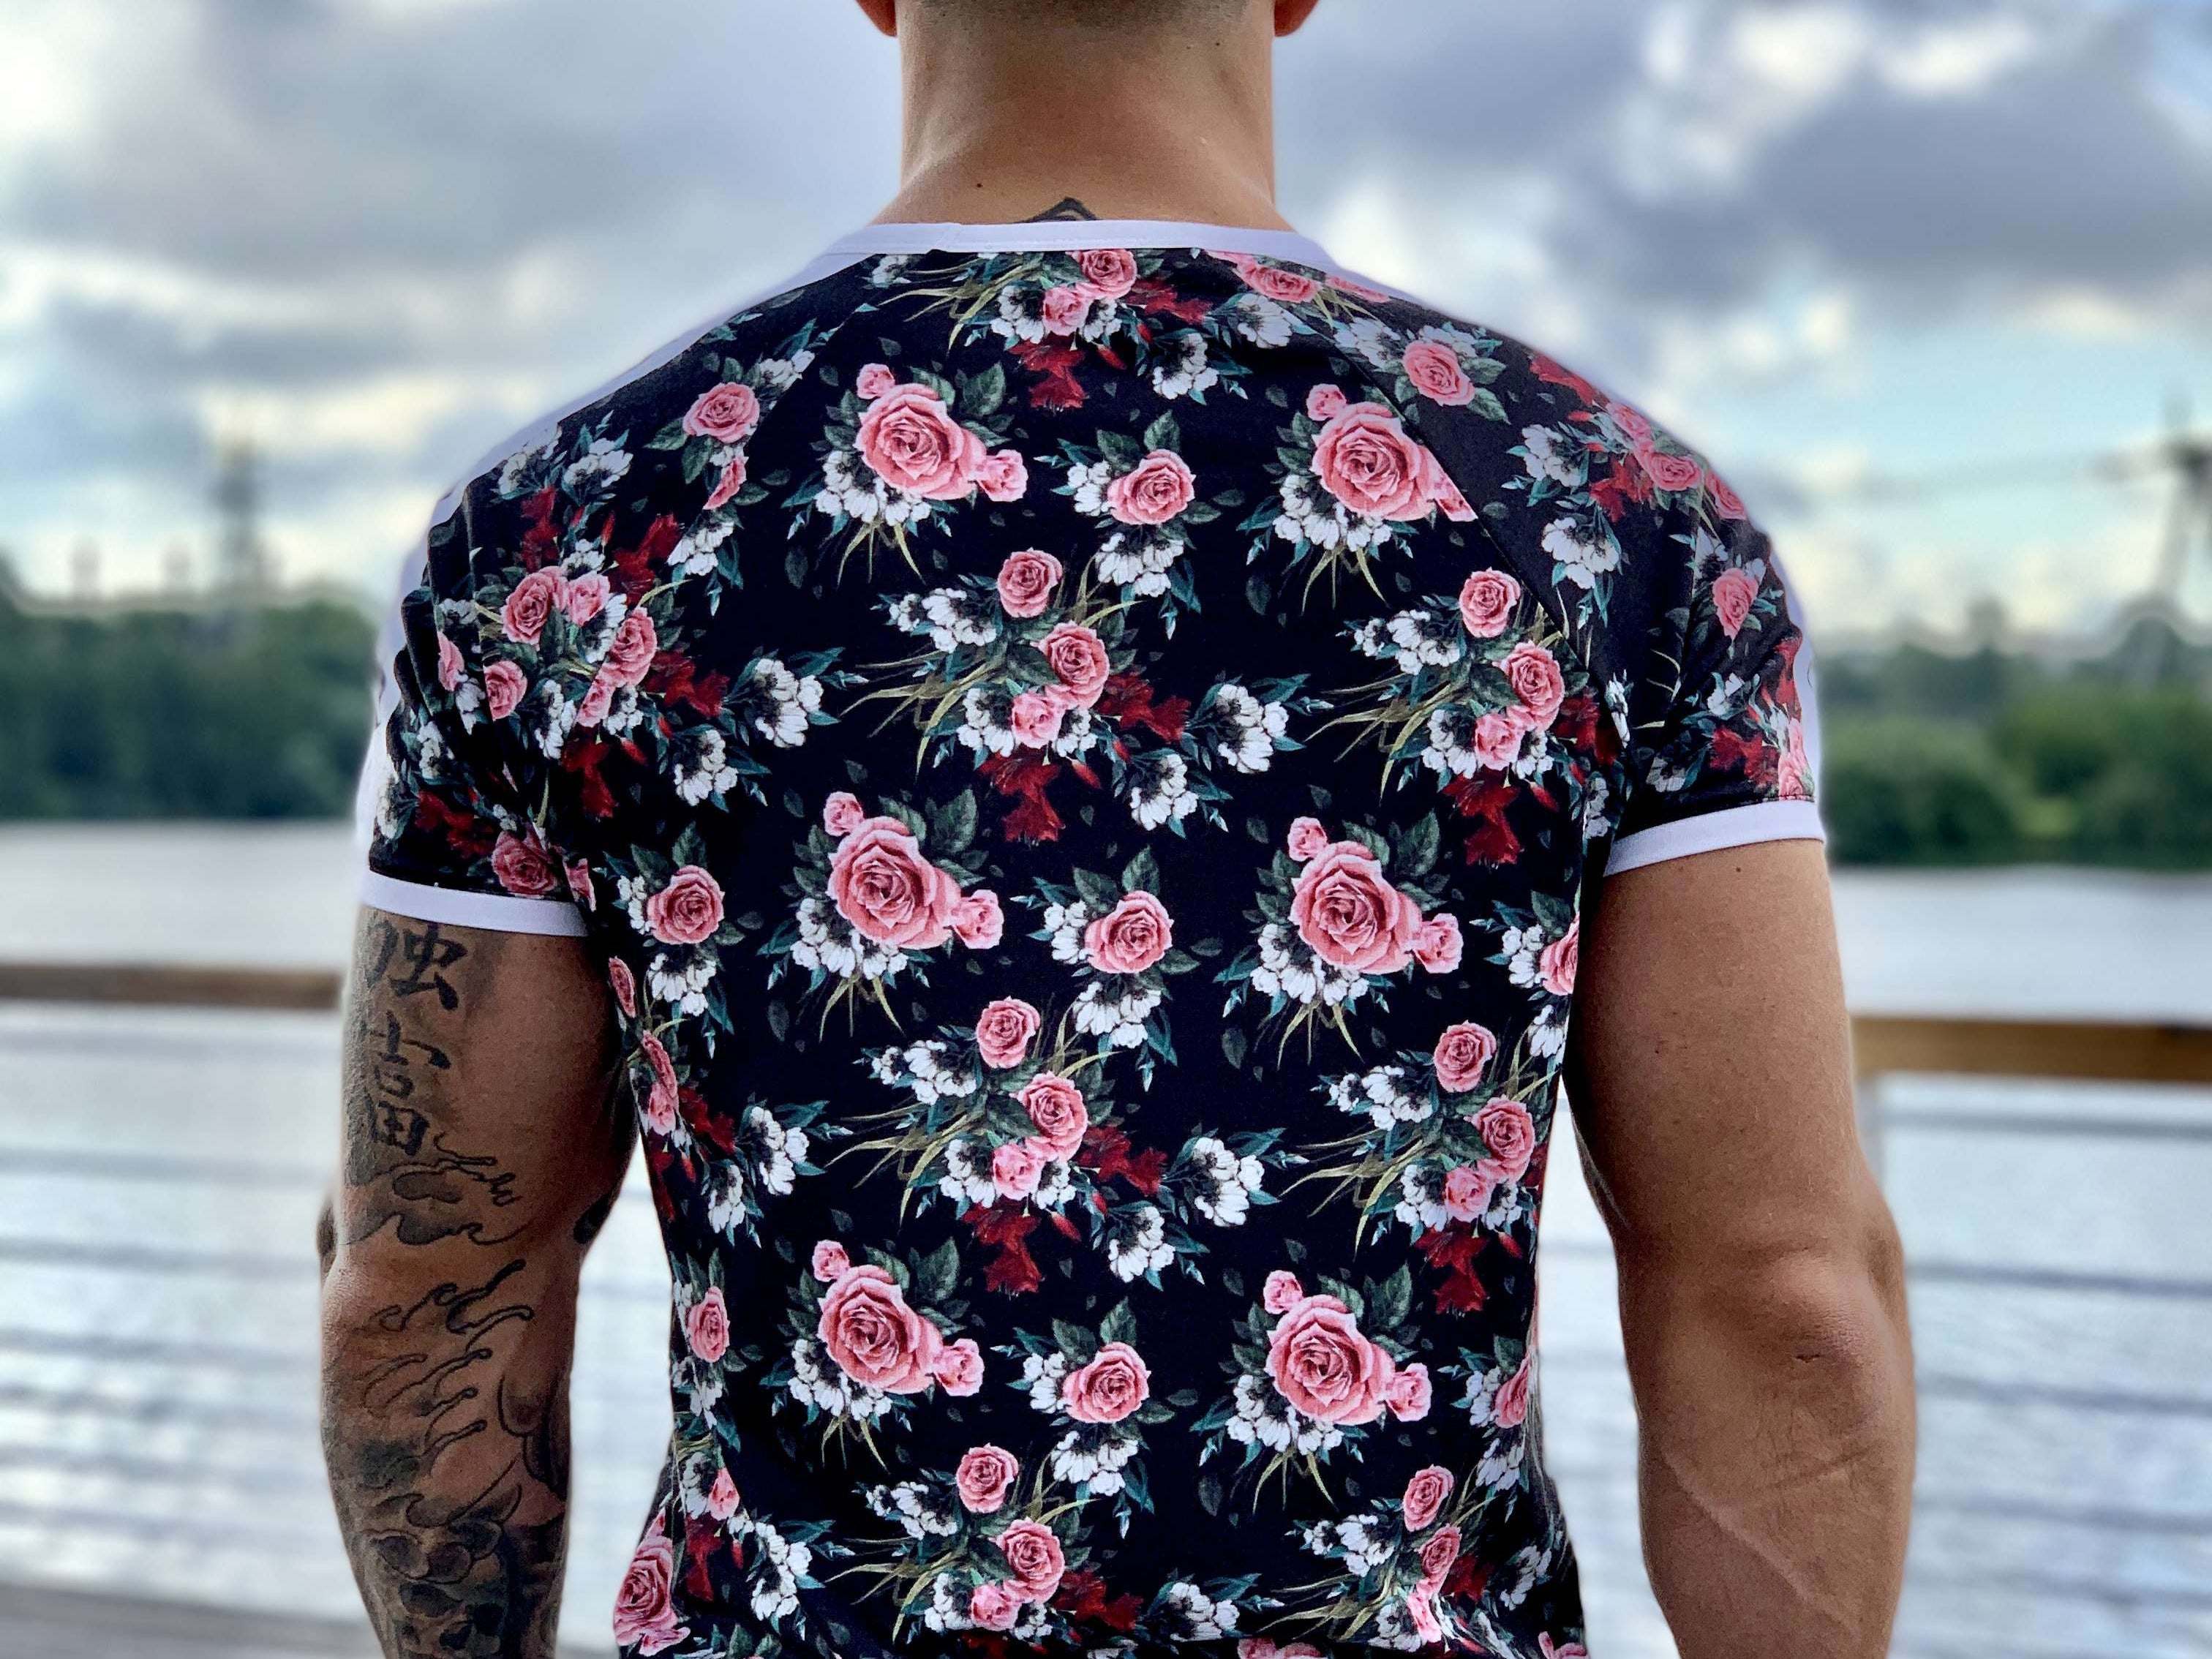 Lover Boy - Flower Design T-shirt for Men (PRE-ORDER DISPATCH DATE 25 SEPTEMBER) - Sarman Fashion - Wholesale Clothing Fashion Brand for Men from Canada